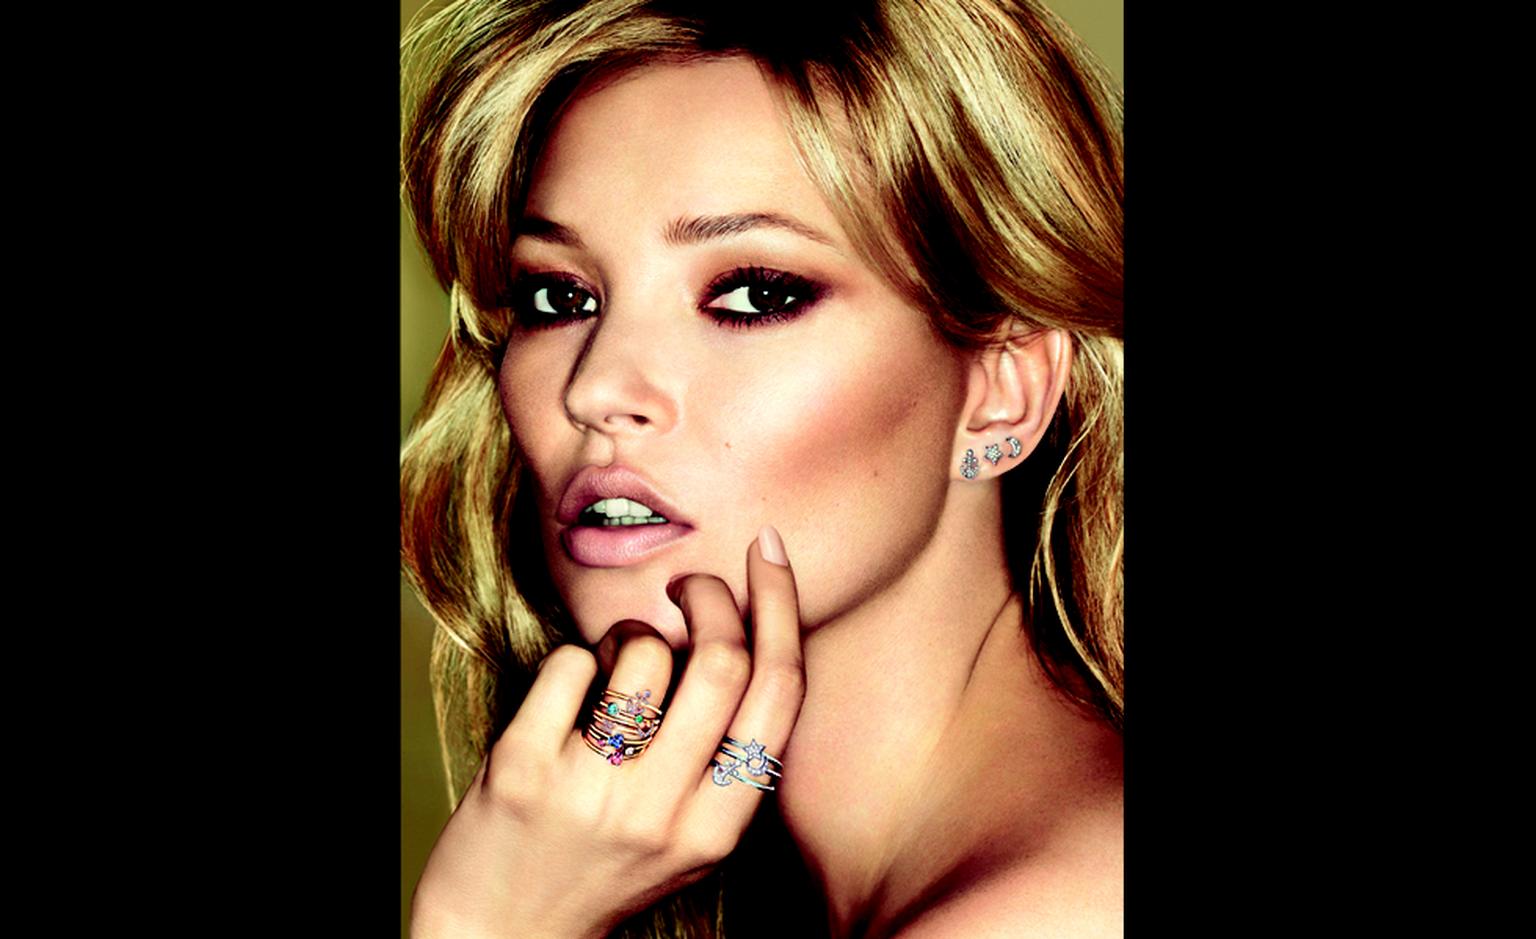 Kate Moss has designed a range of jewels for Fred inspired by her tattoos. set2